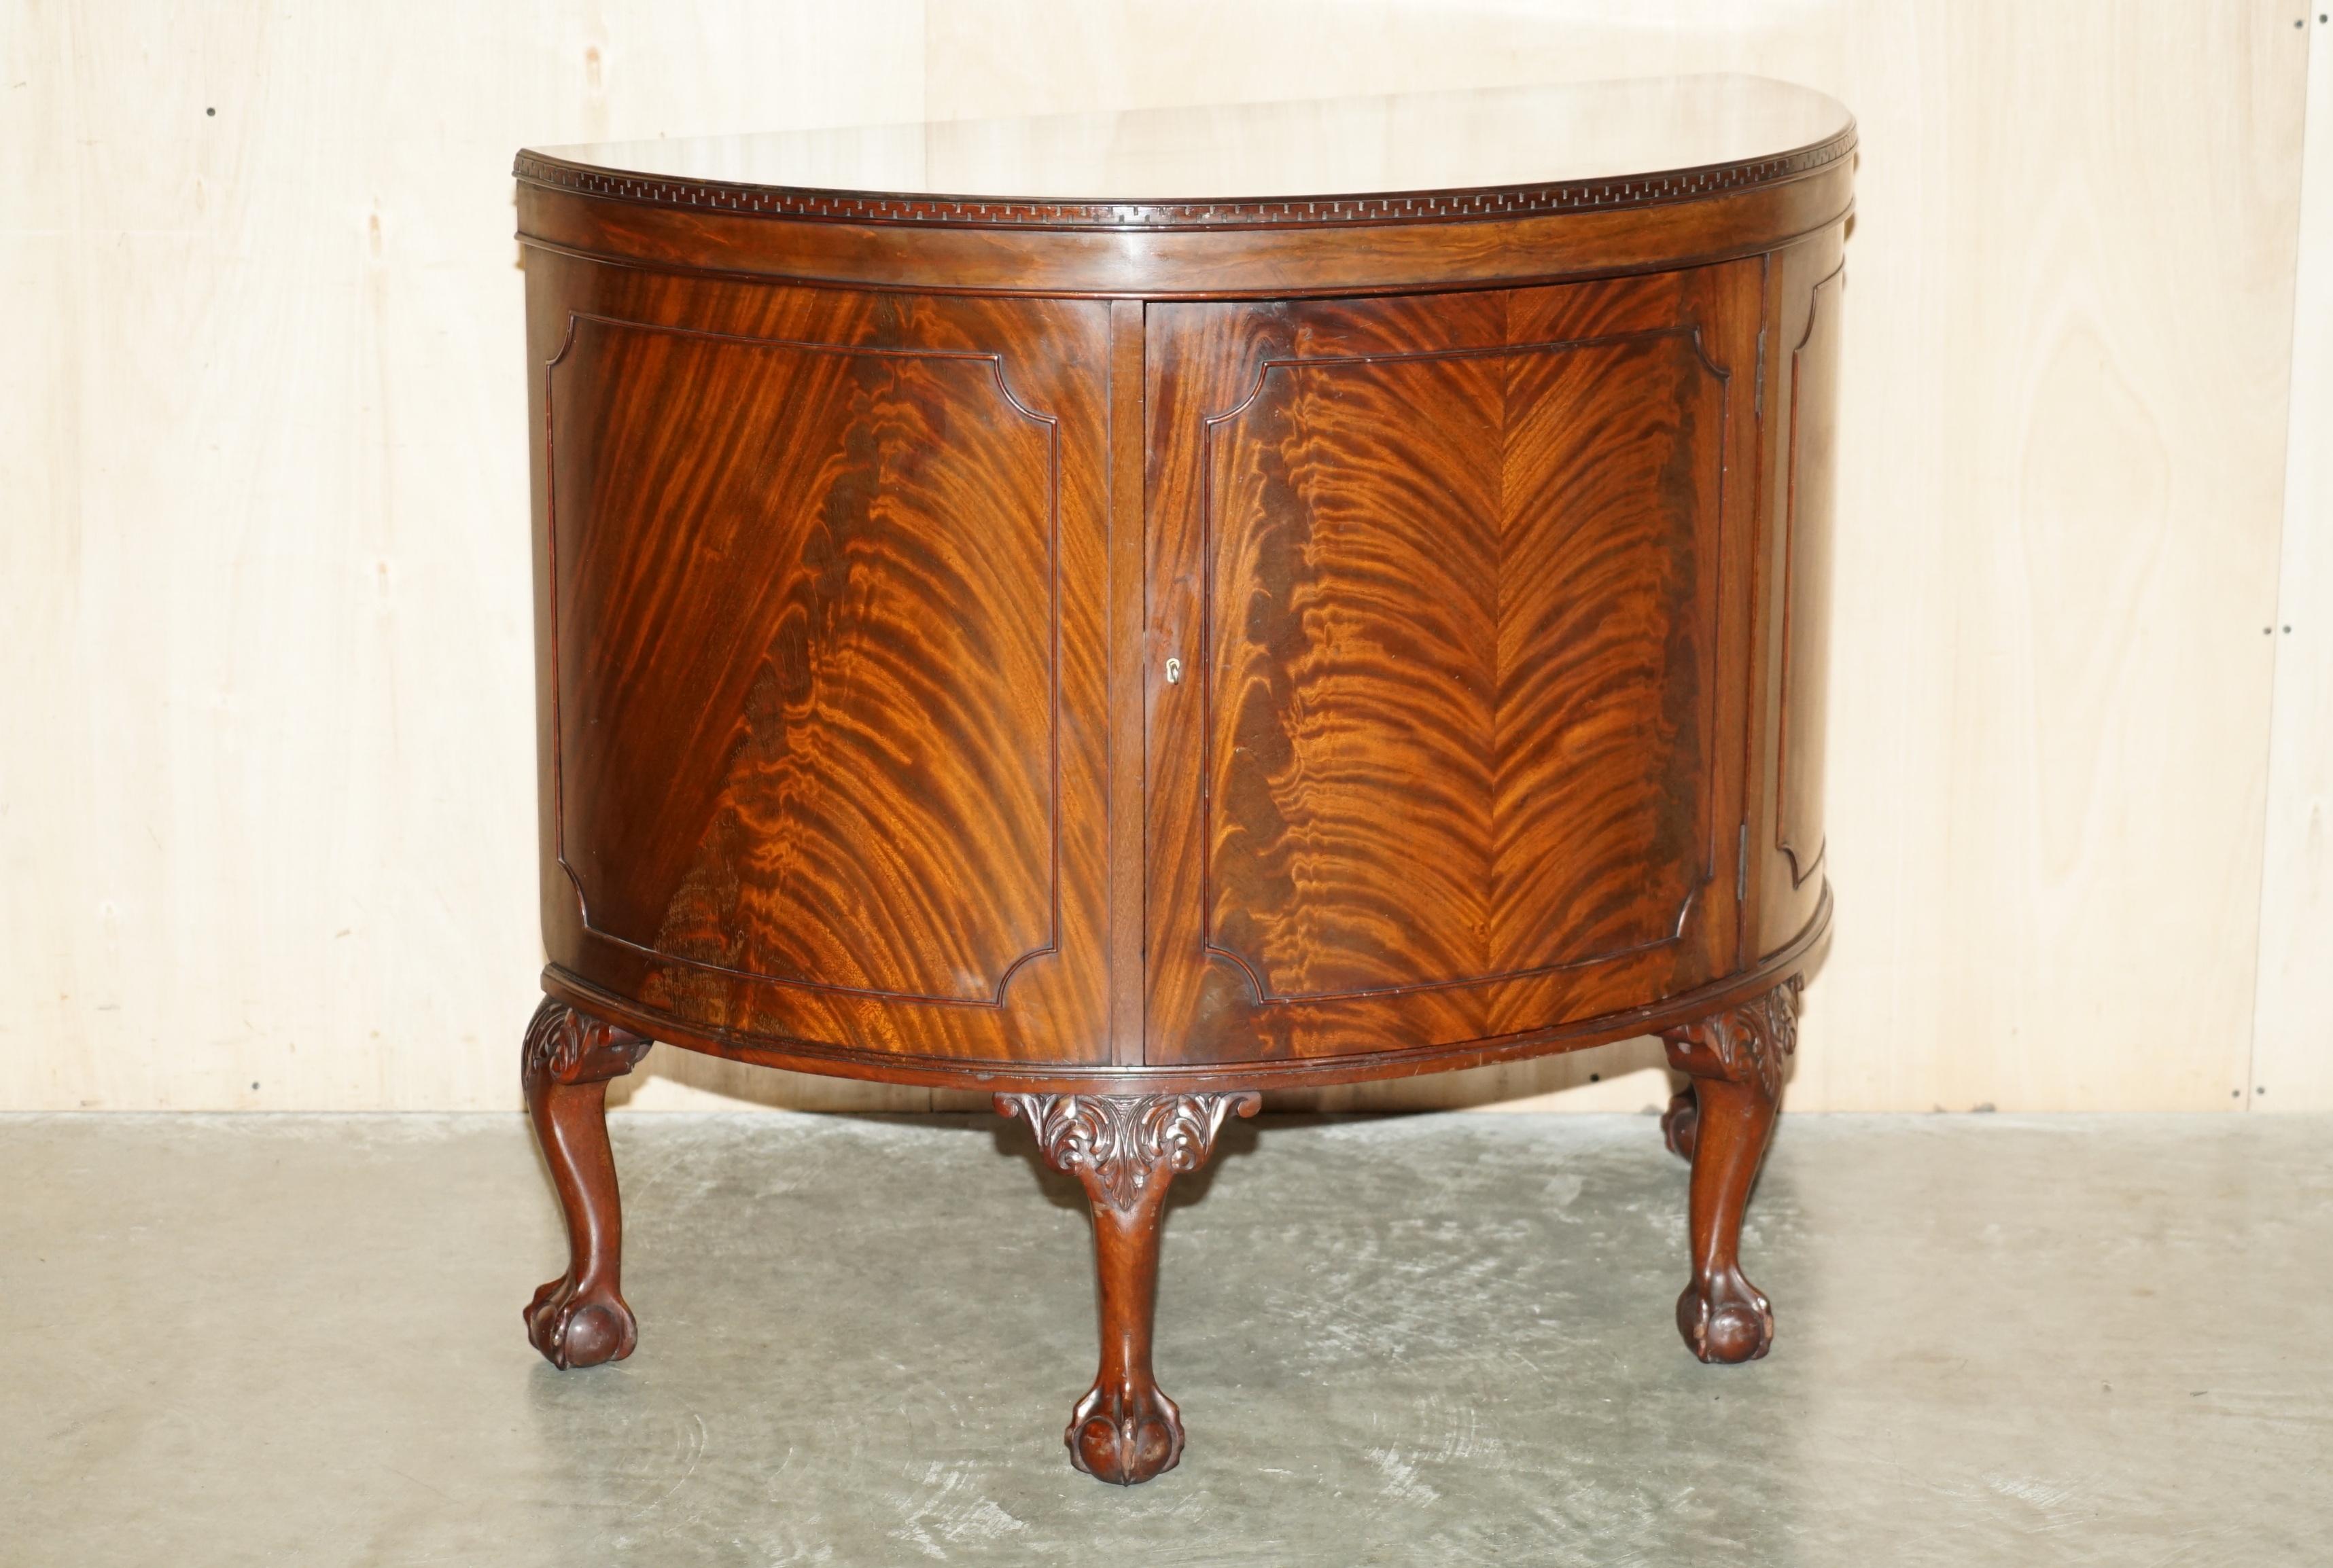 Royal House Antiques

Royal House Antiques is delighted to offer for sale this absolutely exquisite fully restored antique circa 1900 Flamed Mahogany, Claw & Ball foot demi lune sideboard 

Please note the delivery fee listed is just a guide, it